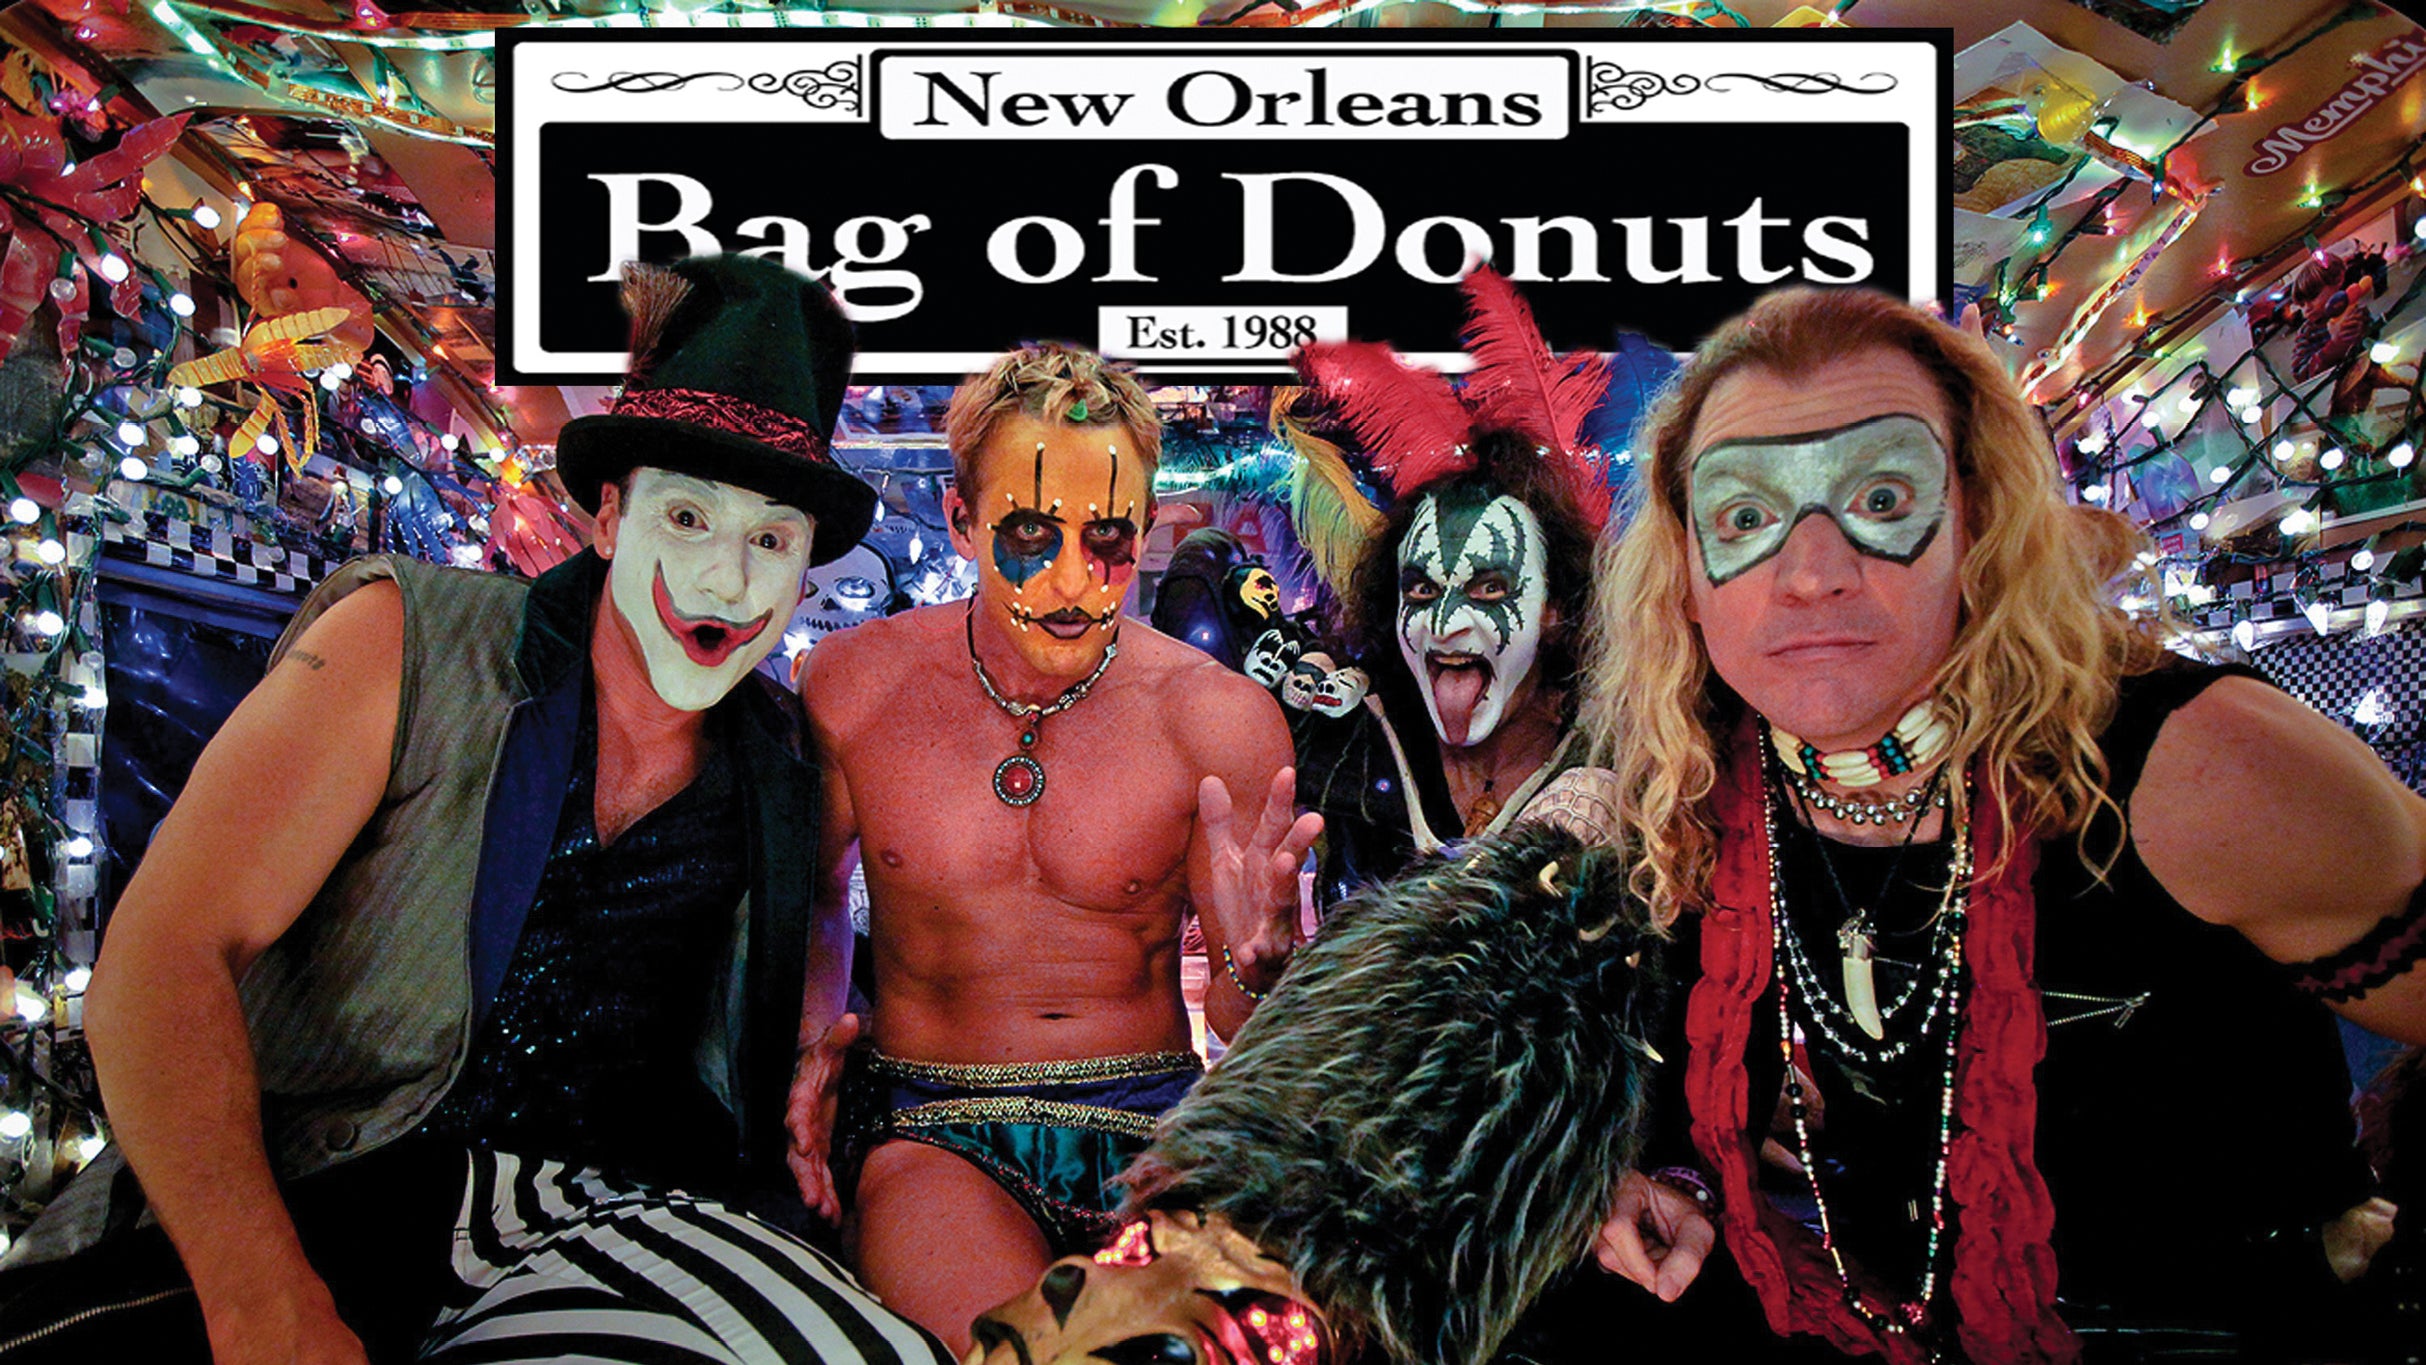 Bag of Donuts in Bay St. Louis promo photo for Player presale offer code